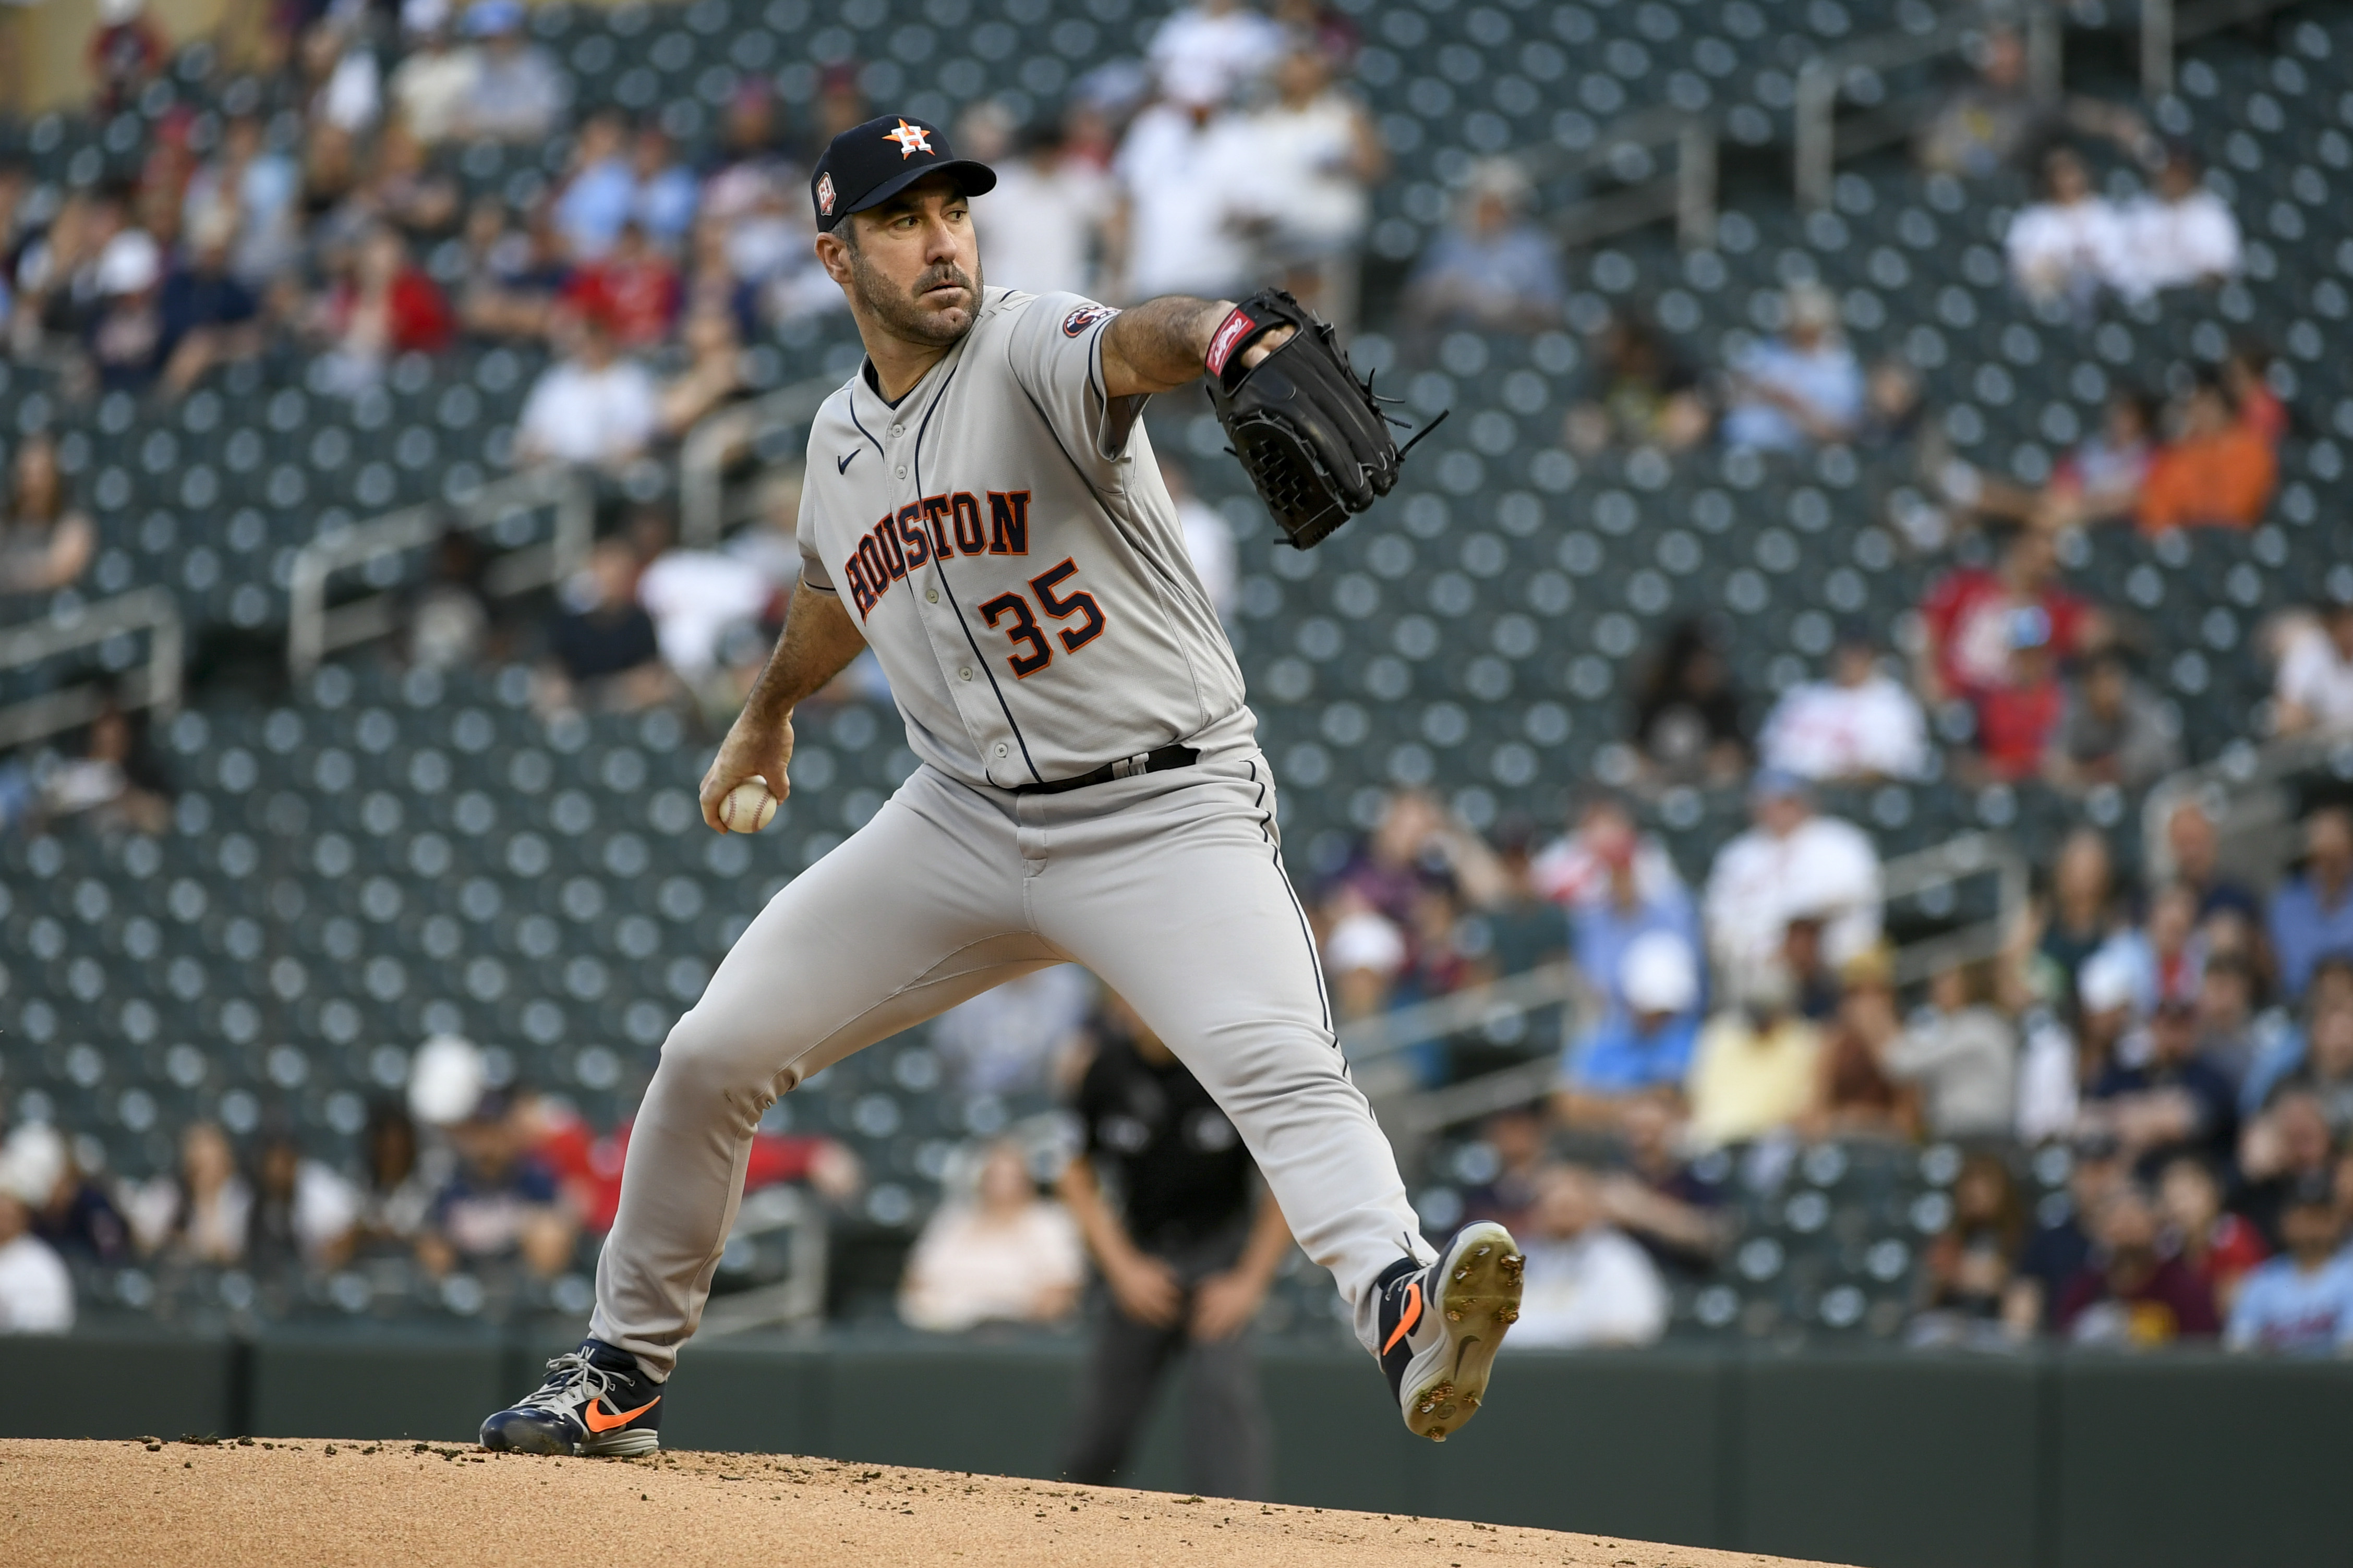 Noda's 1-out single in 9th ends no-hit bid, Astros win 6-2 and send  Athletics to 100th loss